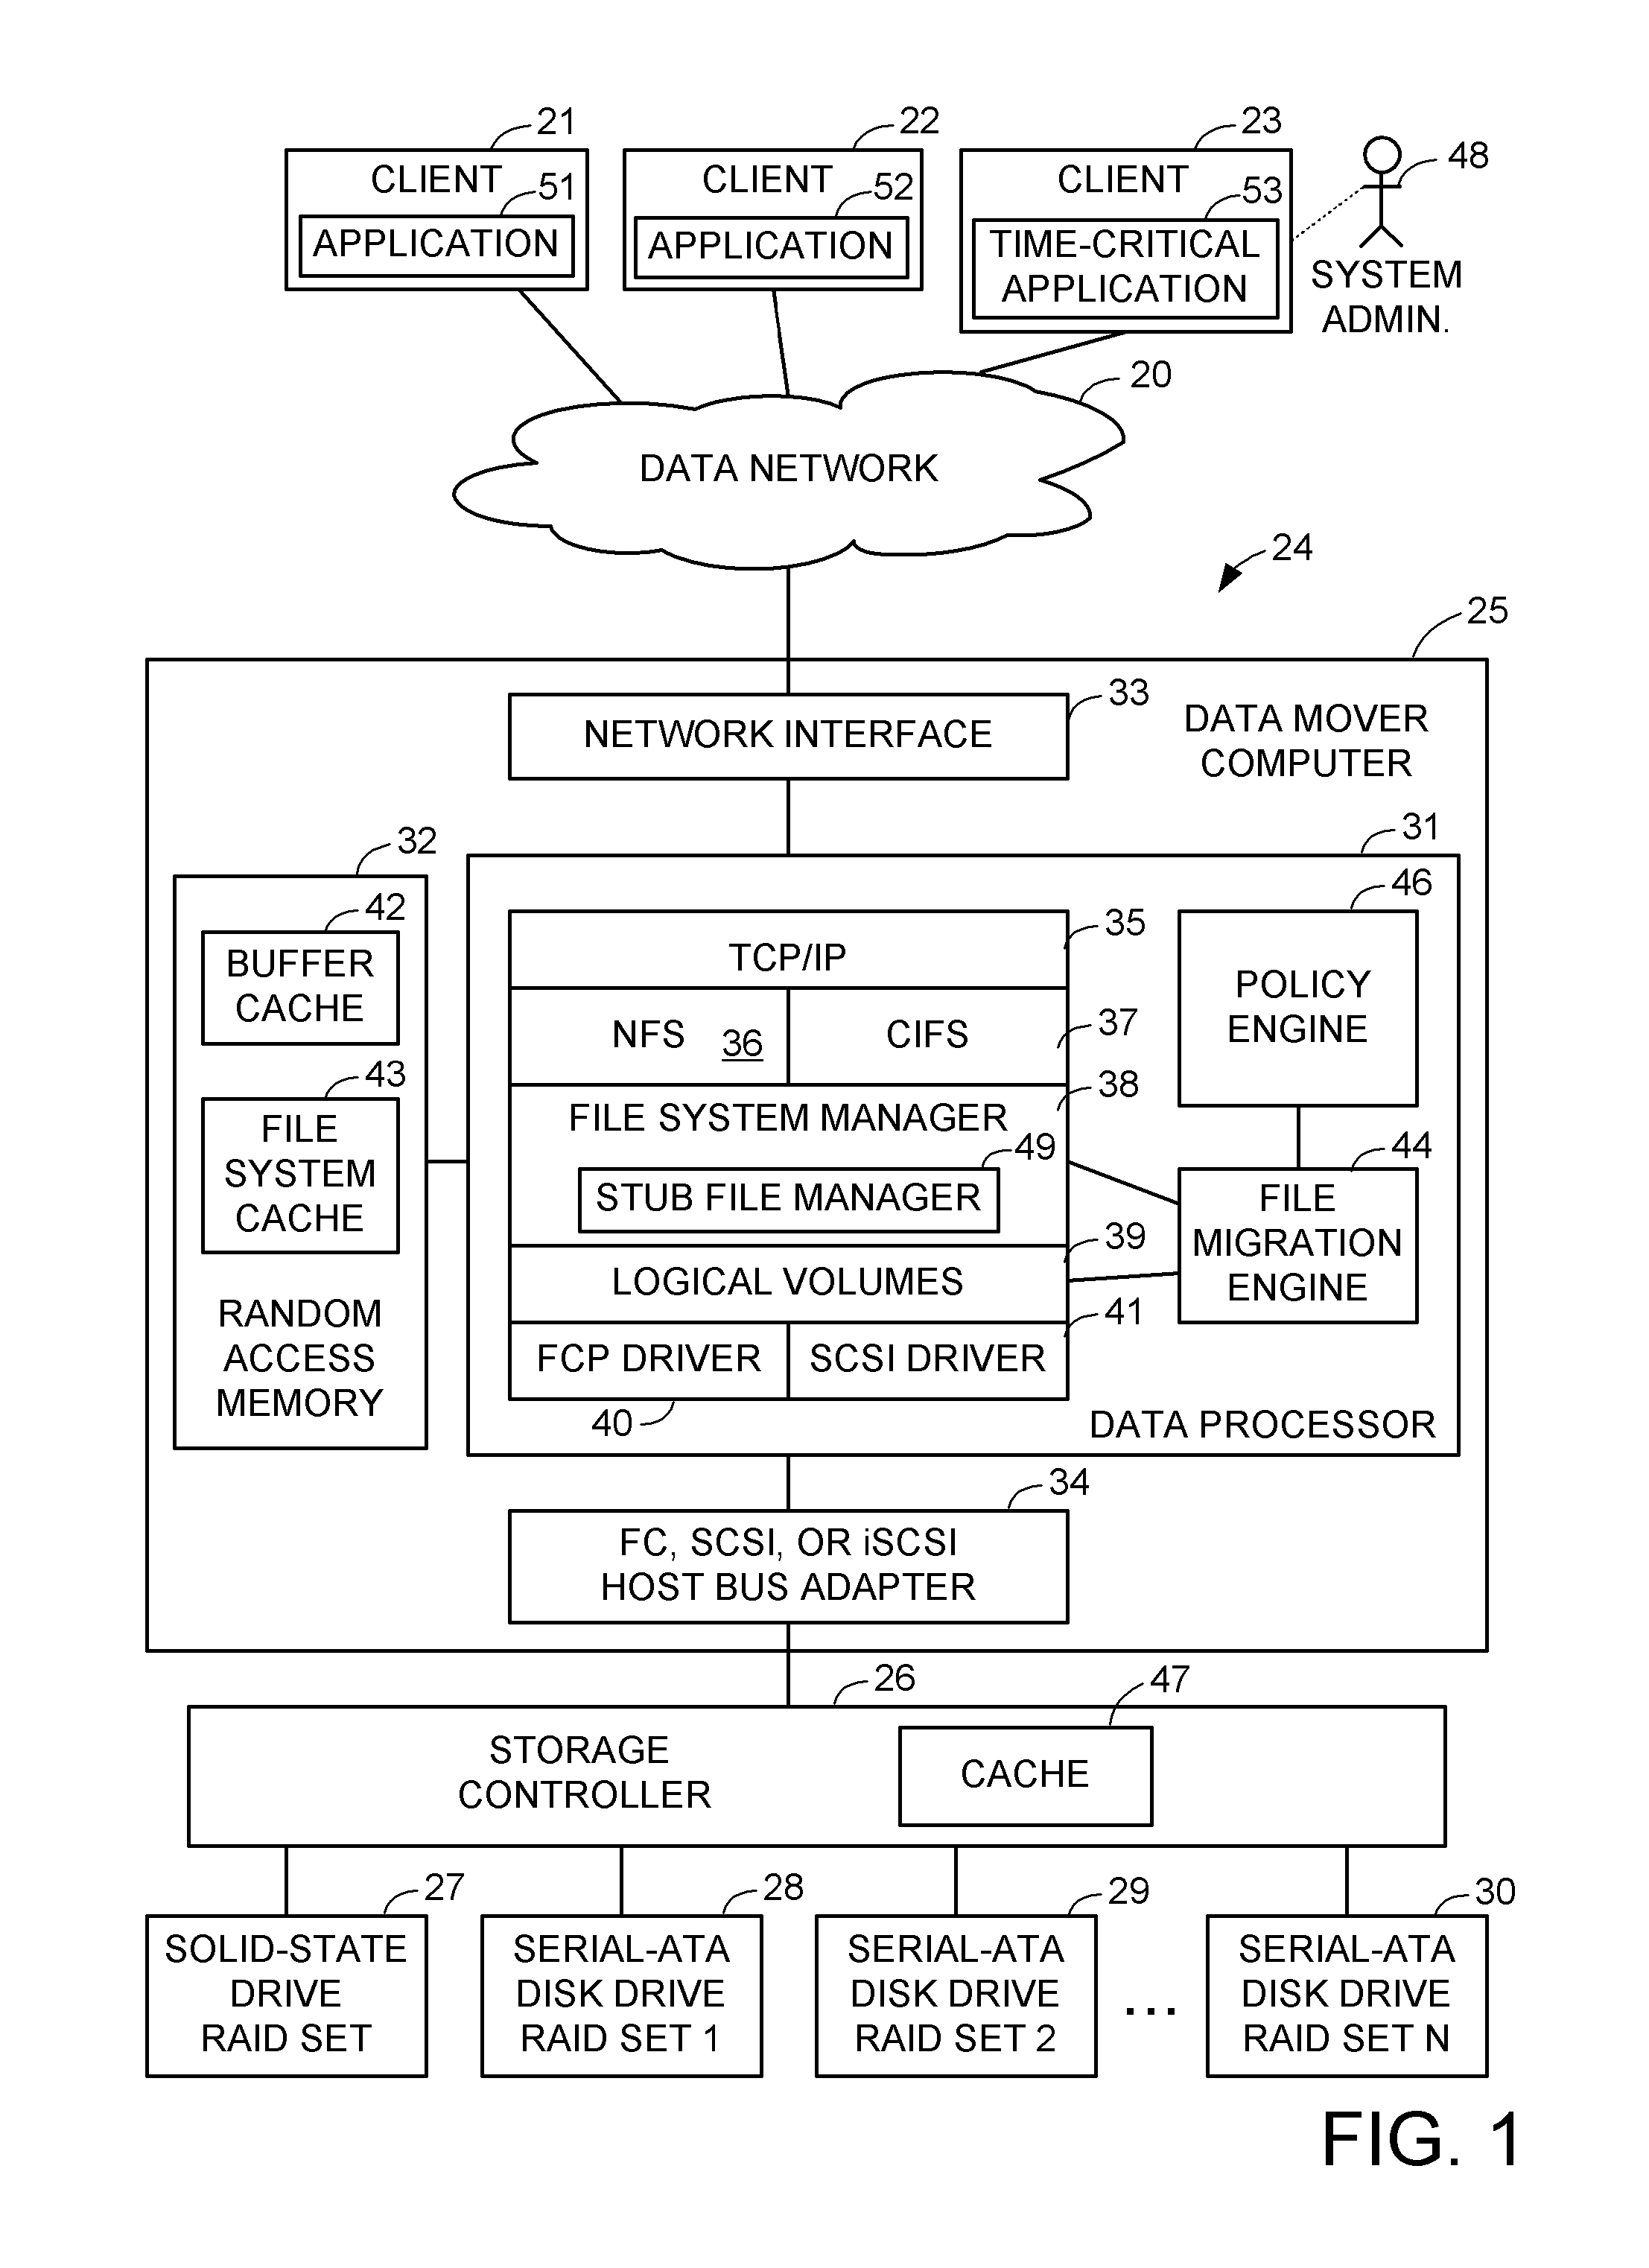 File server system having tiered storage including solid-state drive primary storage and magnetic disk drive secondary storage